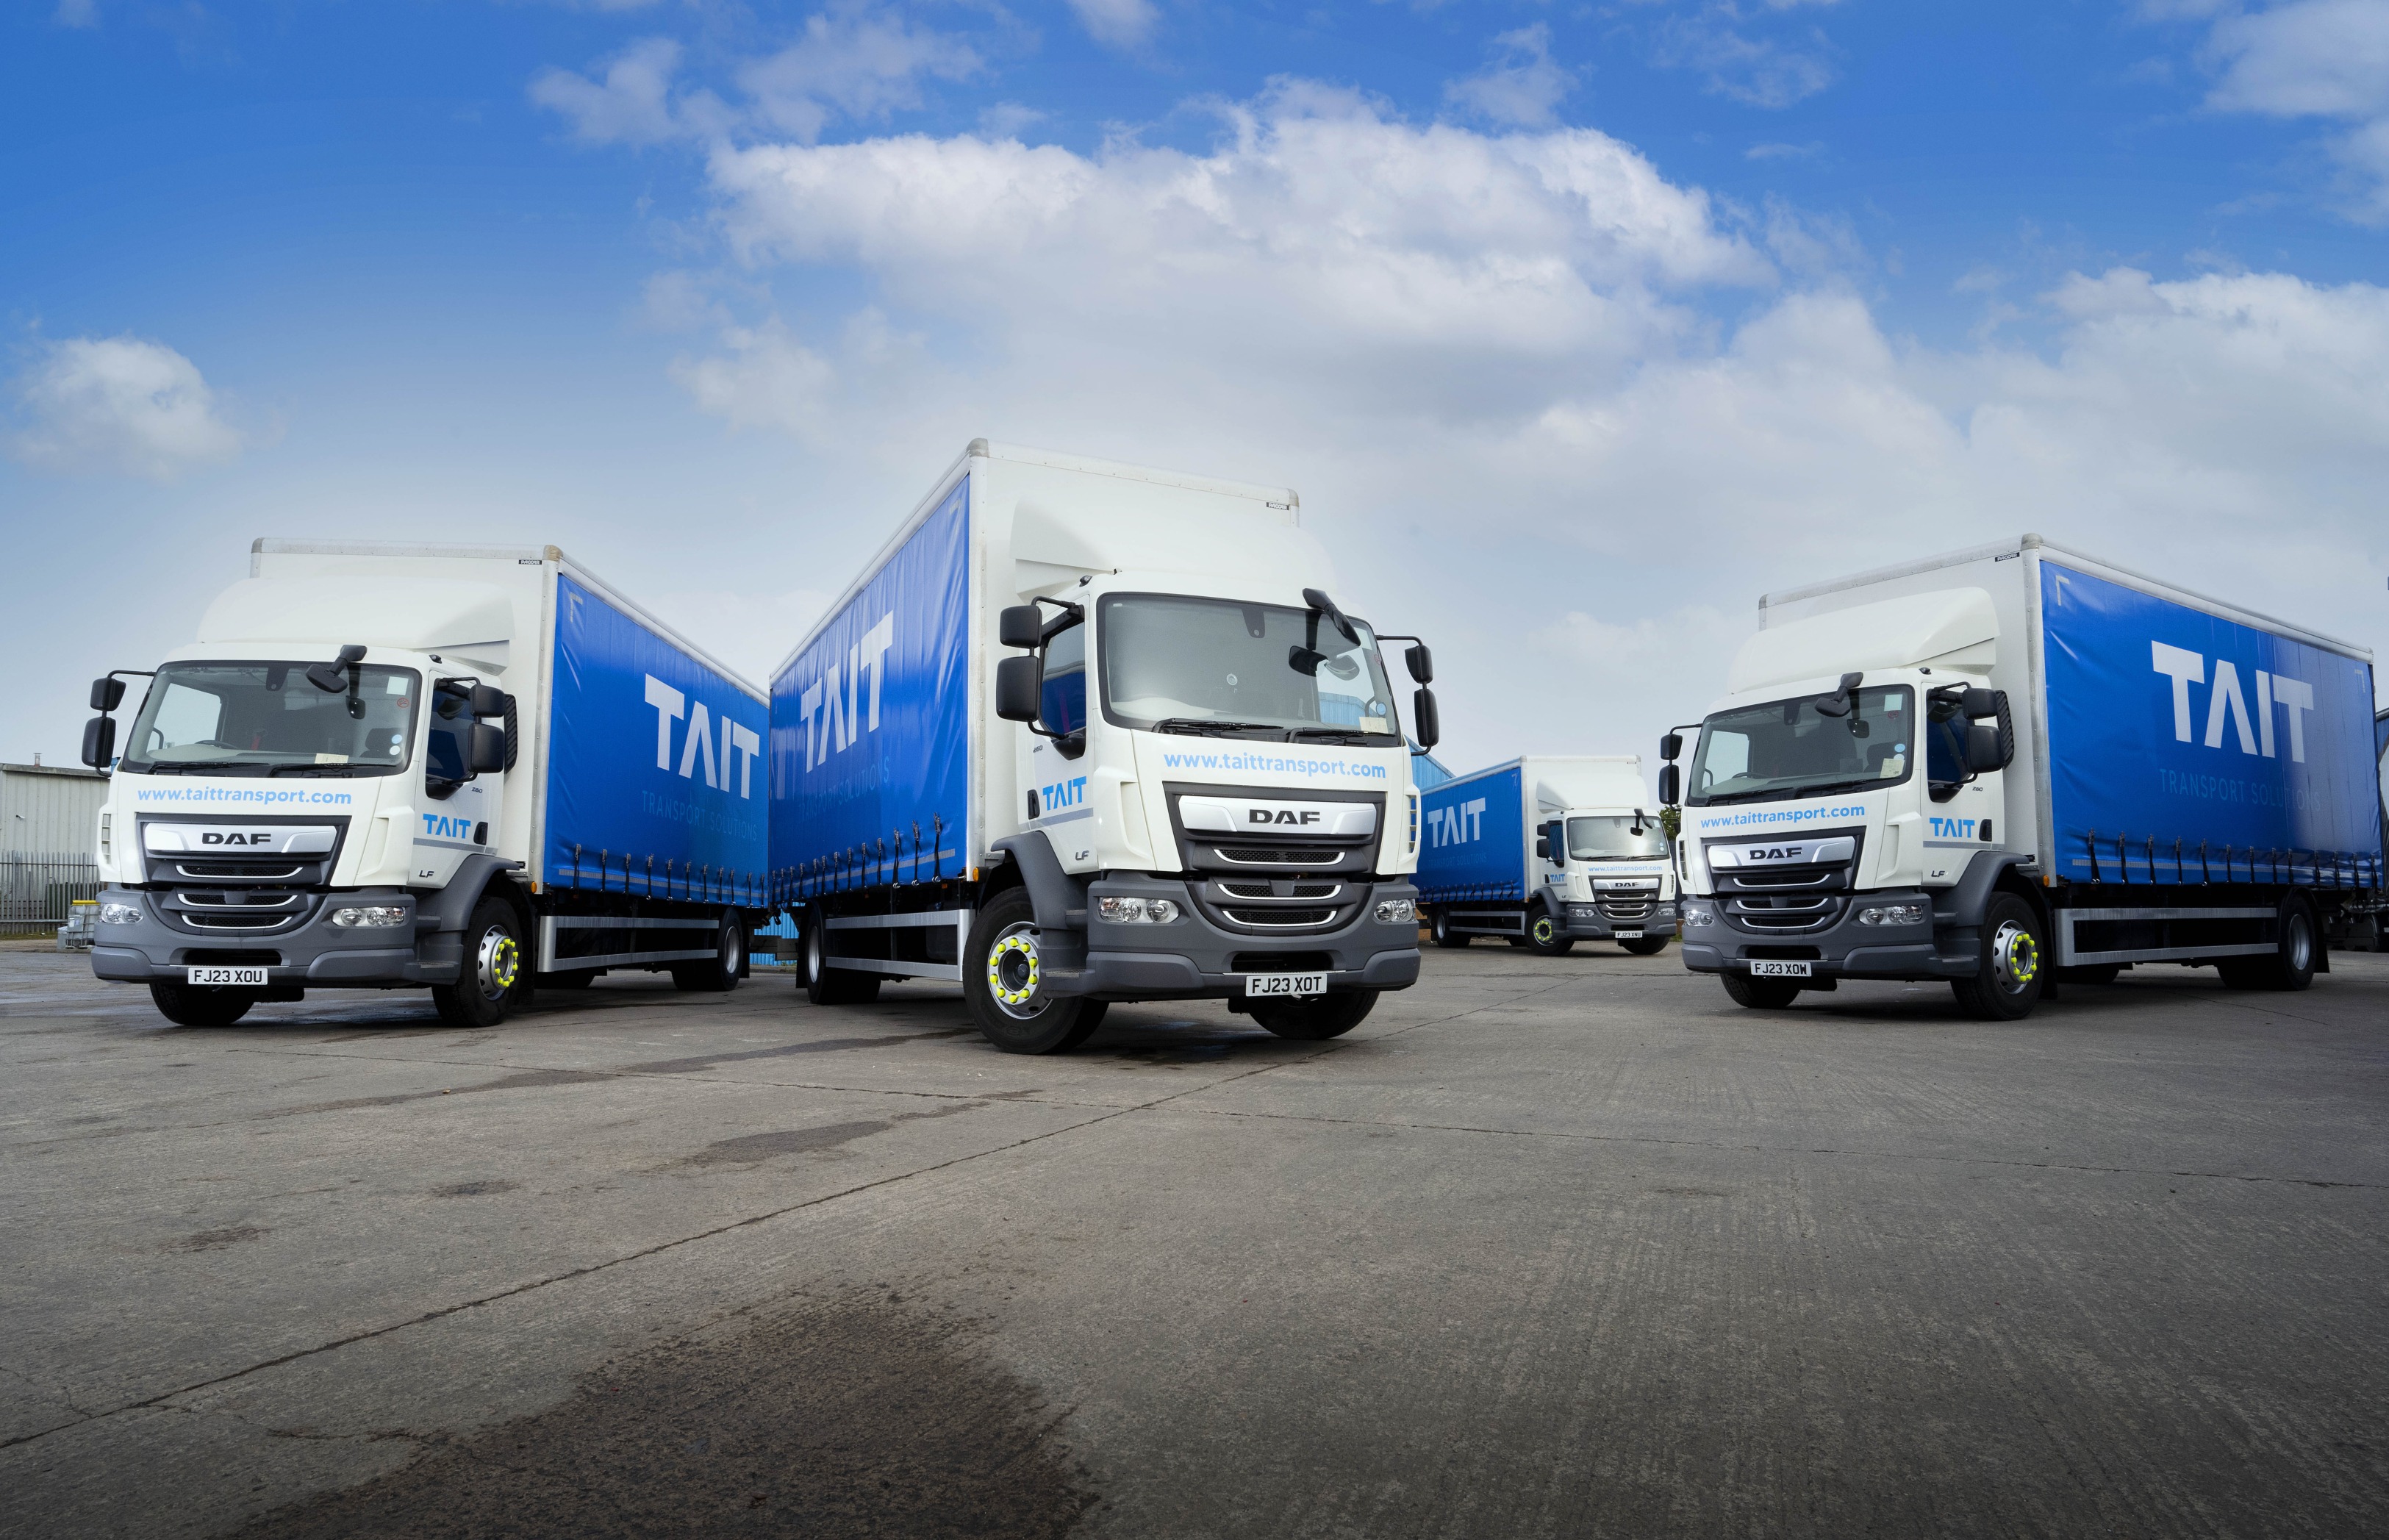 Three curtainsided trucks, part of the Tait Transport Solutions fleet upgrade from Dawsongroup truck and trailer.